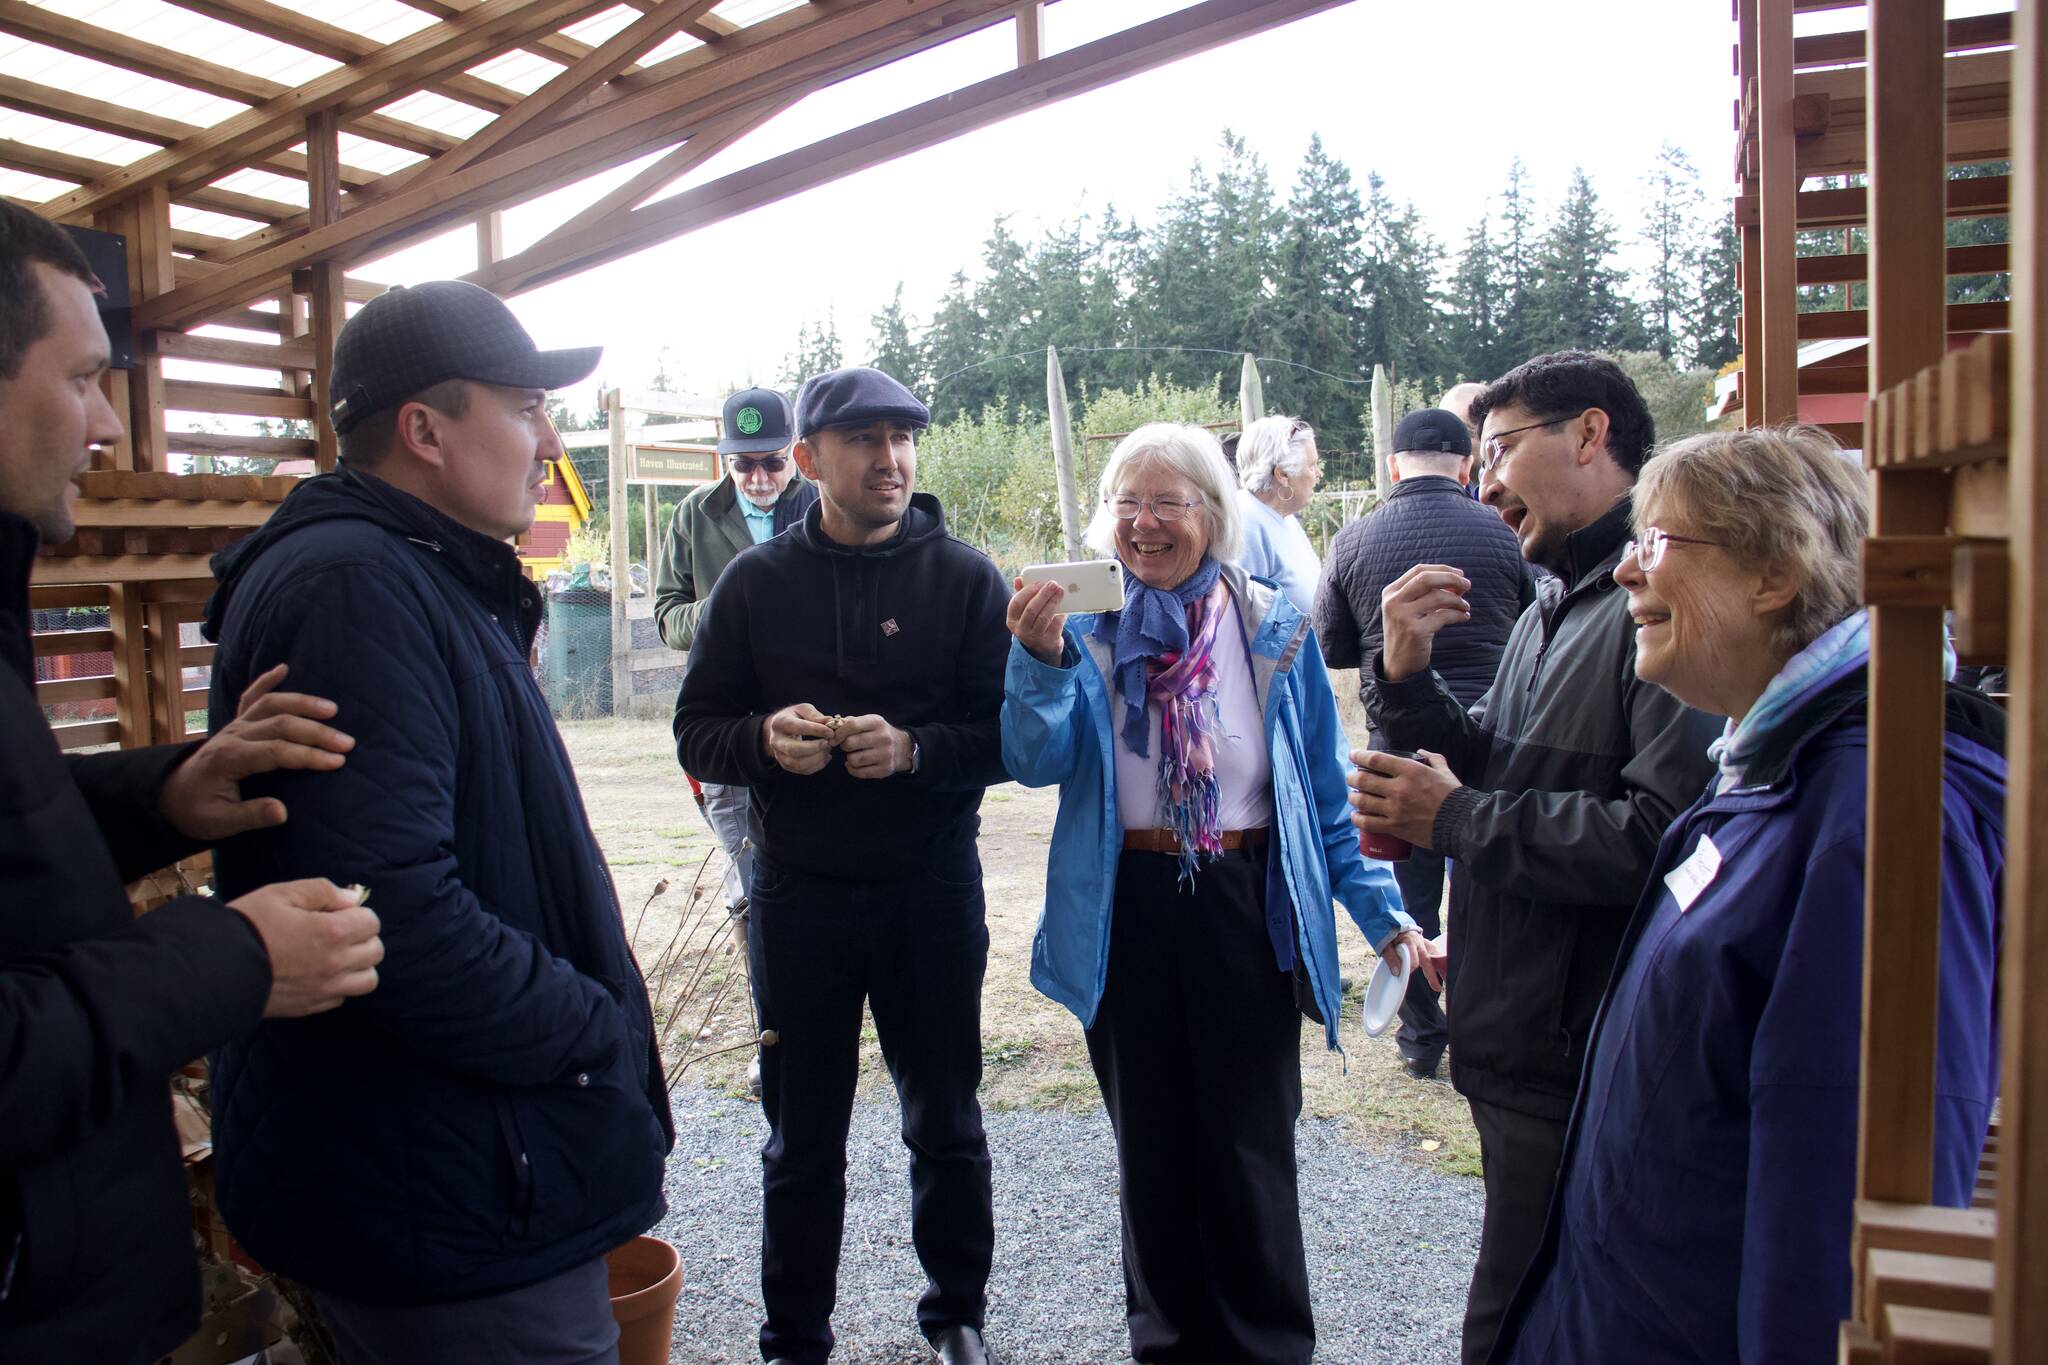 Photo by Rachel Rosen/Whidbey News-Times
(L-R) Abdumumin Shamsiev, an Uzbek farmer, Kakhramon Ishkuhamedov, an agriculture business owner, Maruf Butaev of the Uzbek Ministry of Agriculture, tour leader Charlotte Chase and interpreter Almurad Kasym learn from Susan Prescott of South Whidbey Tilth about organic farming practices.